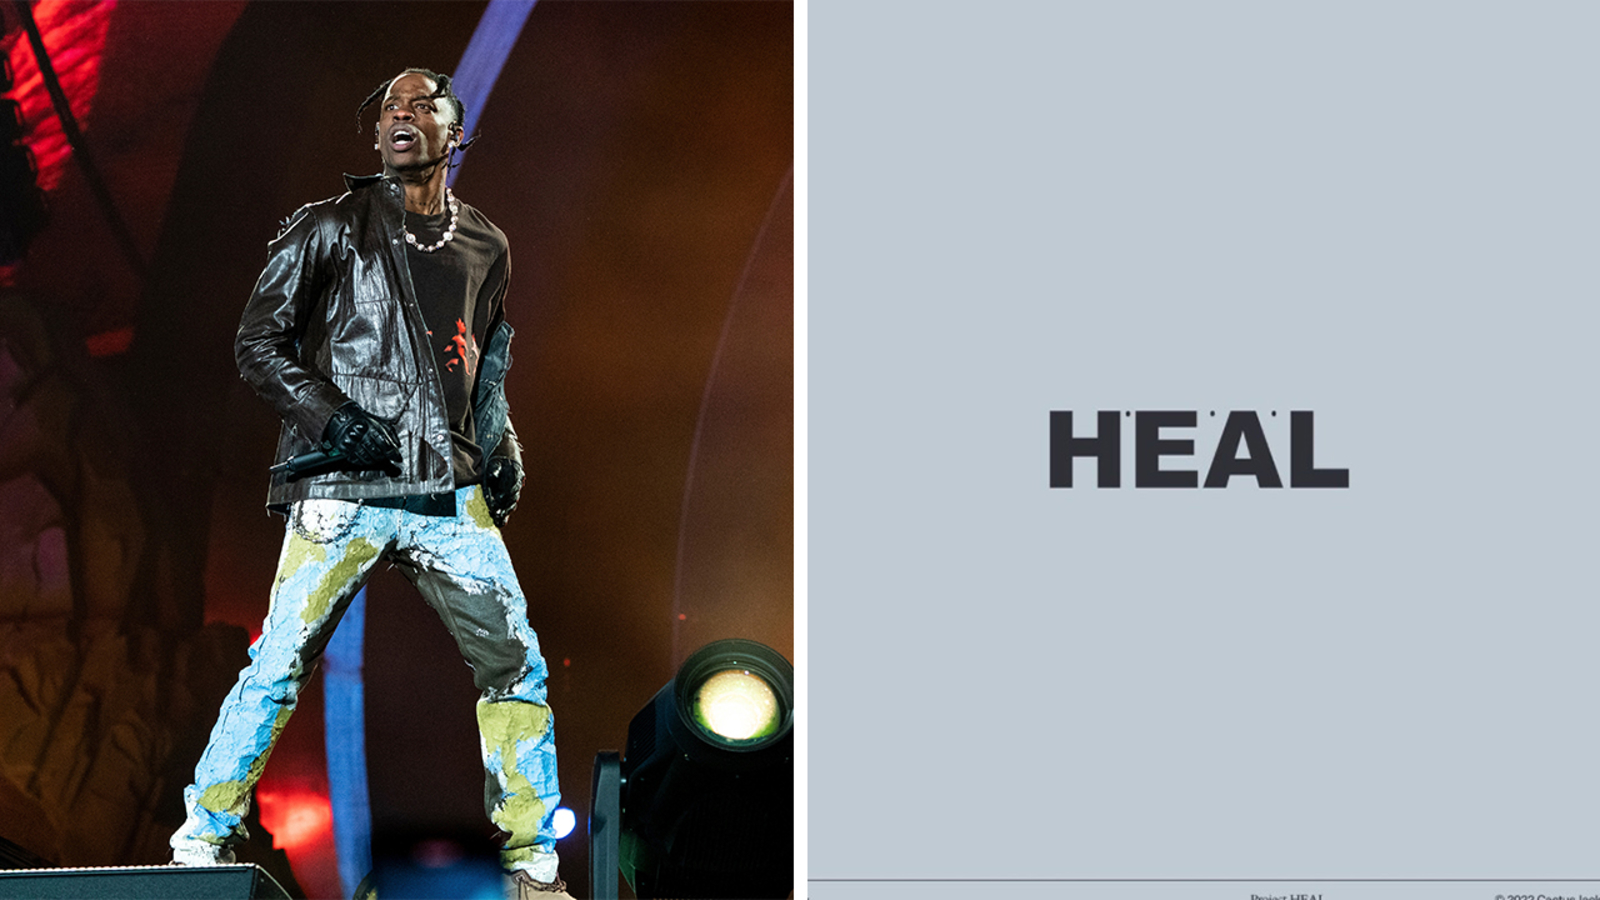 Travis Scott returns to social media after Astroworld deaths with ‘Project HEAL’ announcement